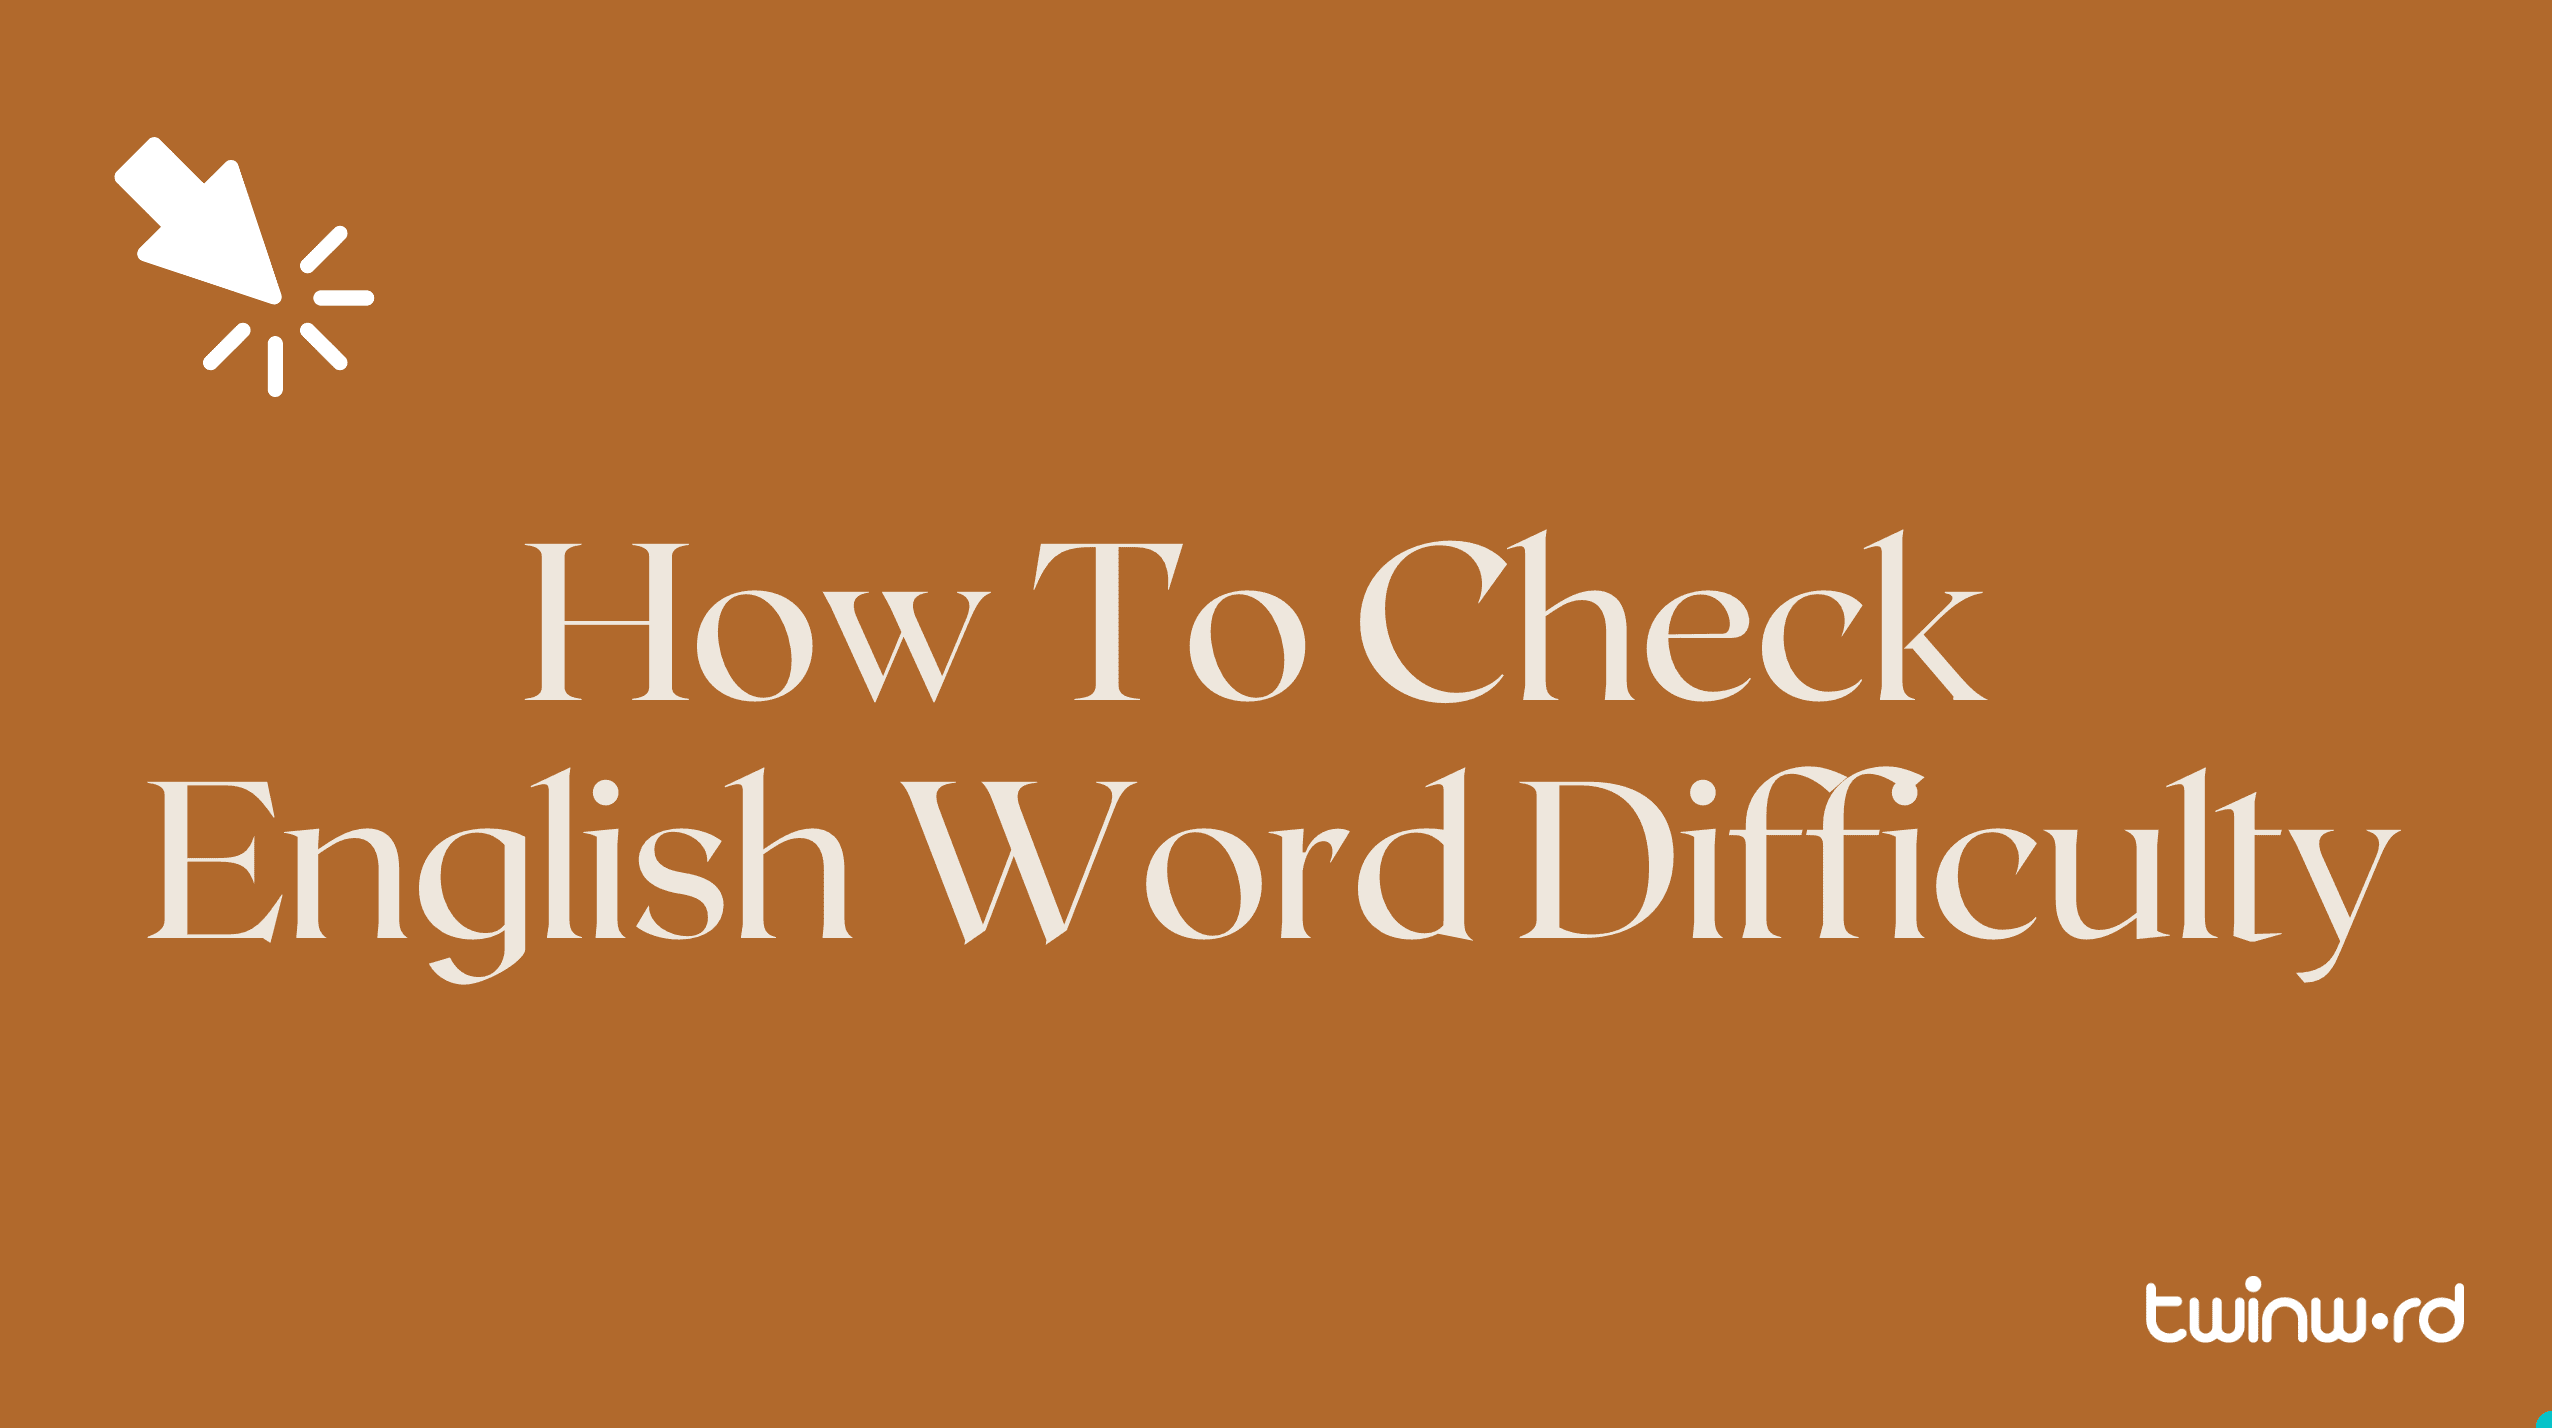 How To Check English Word Difficulty